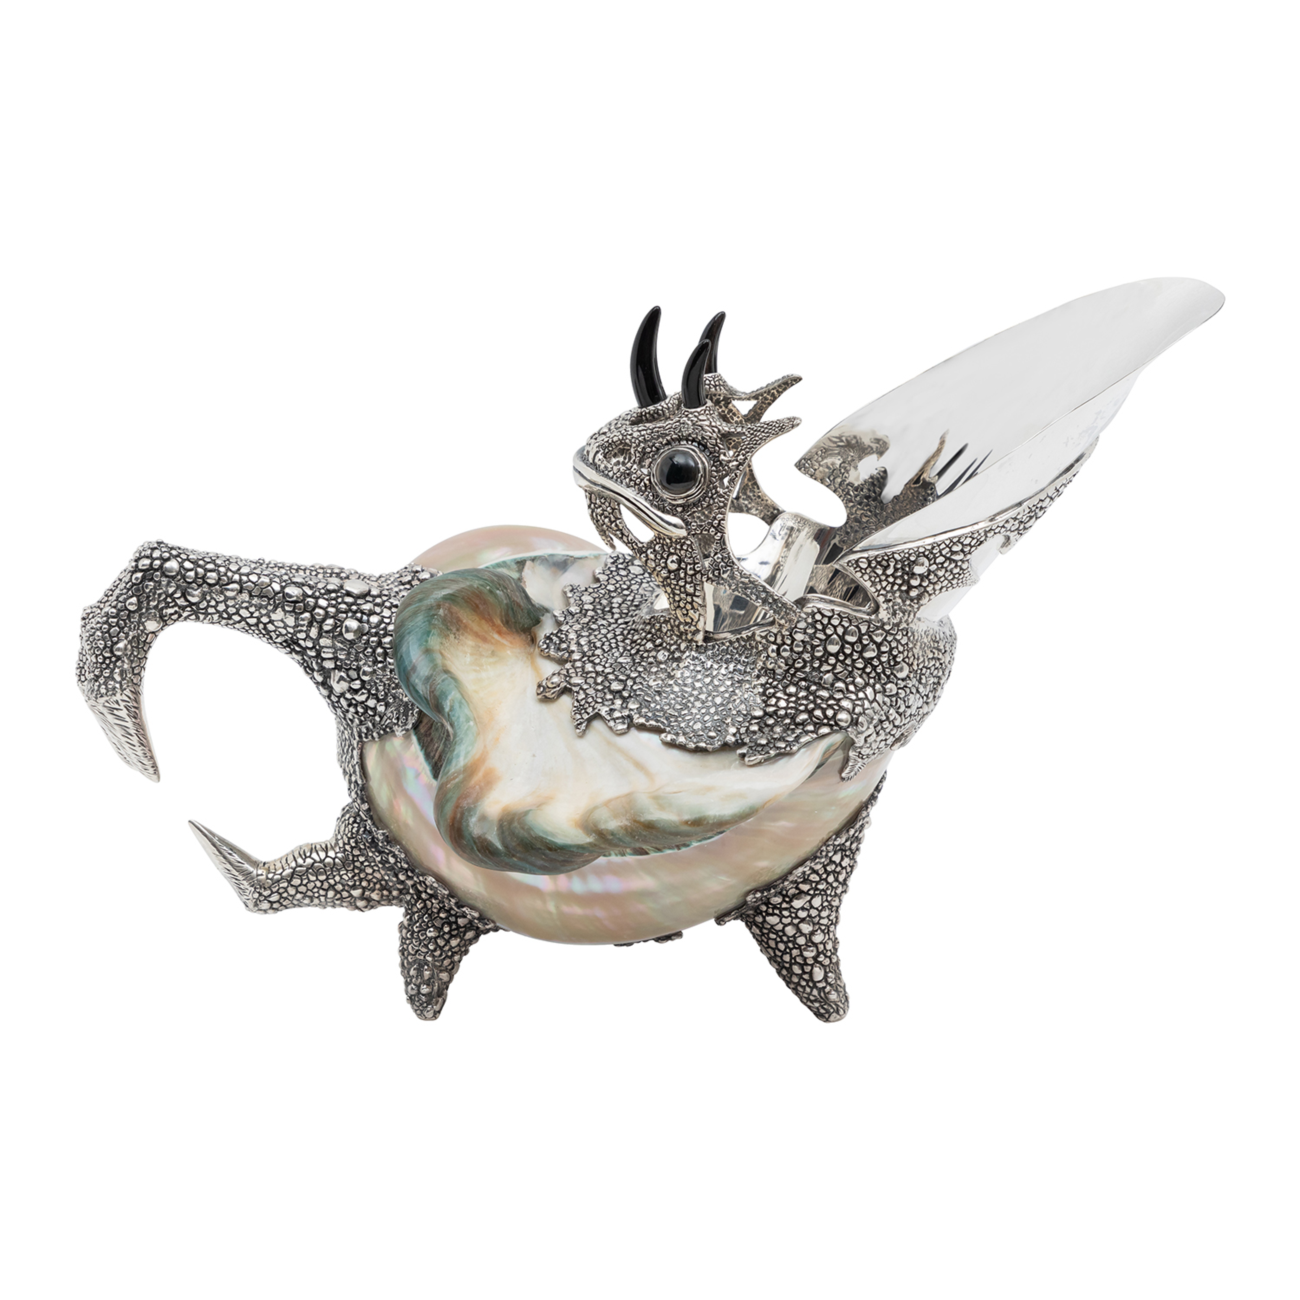 Camouflaging Silver Chameleon and Carved Shell Gravy Bowl